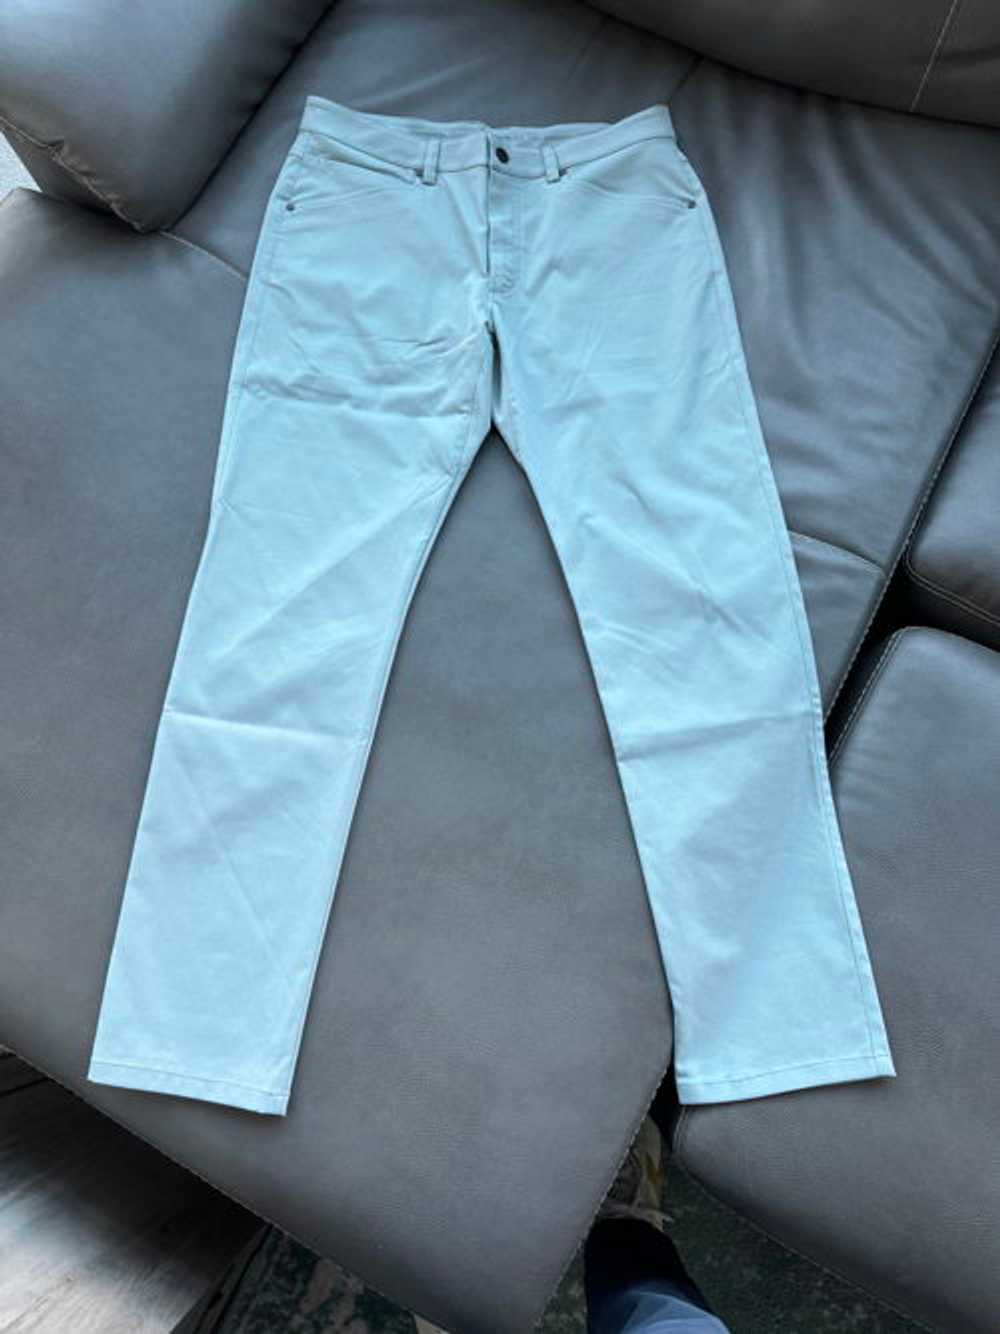 Myles Apparel Tour Pant in Steely Blue (Original … - image 4